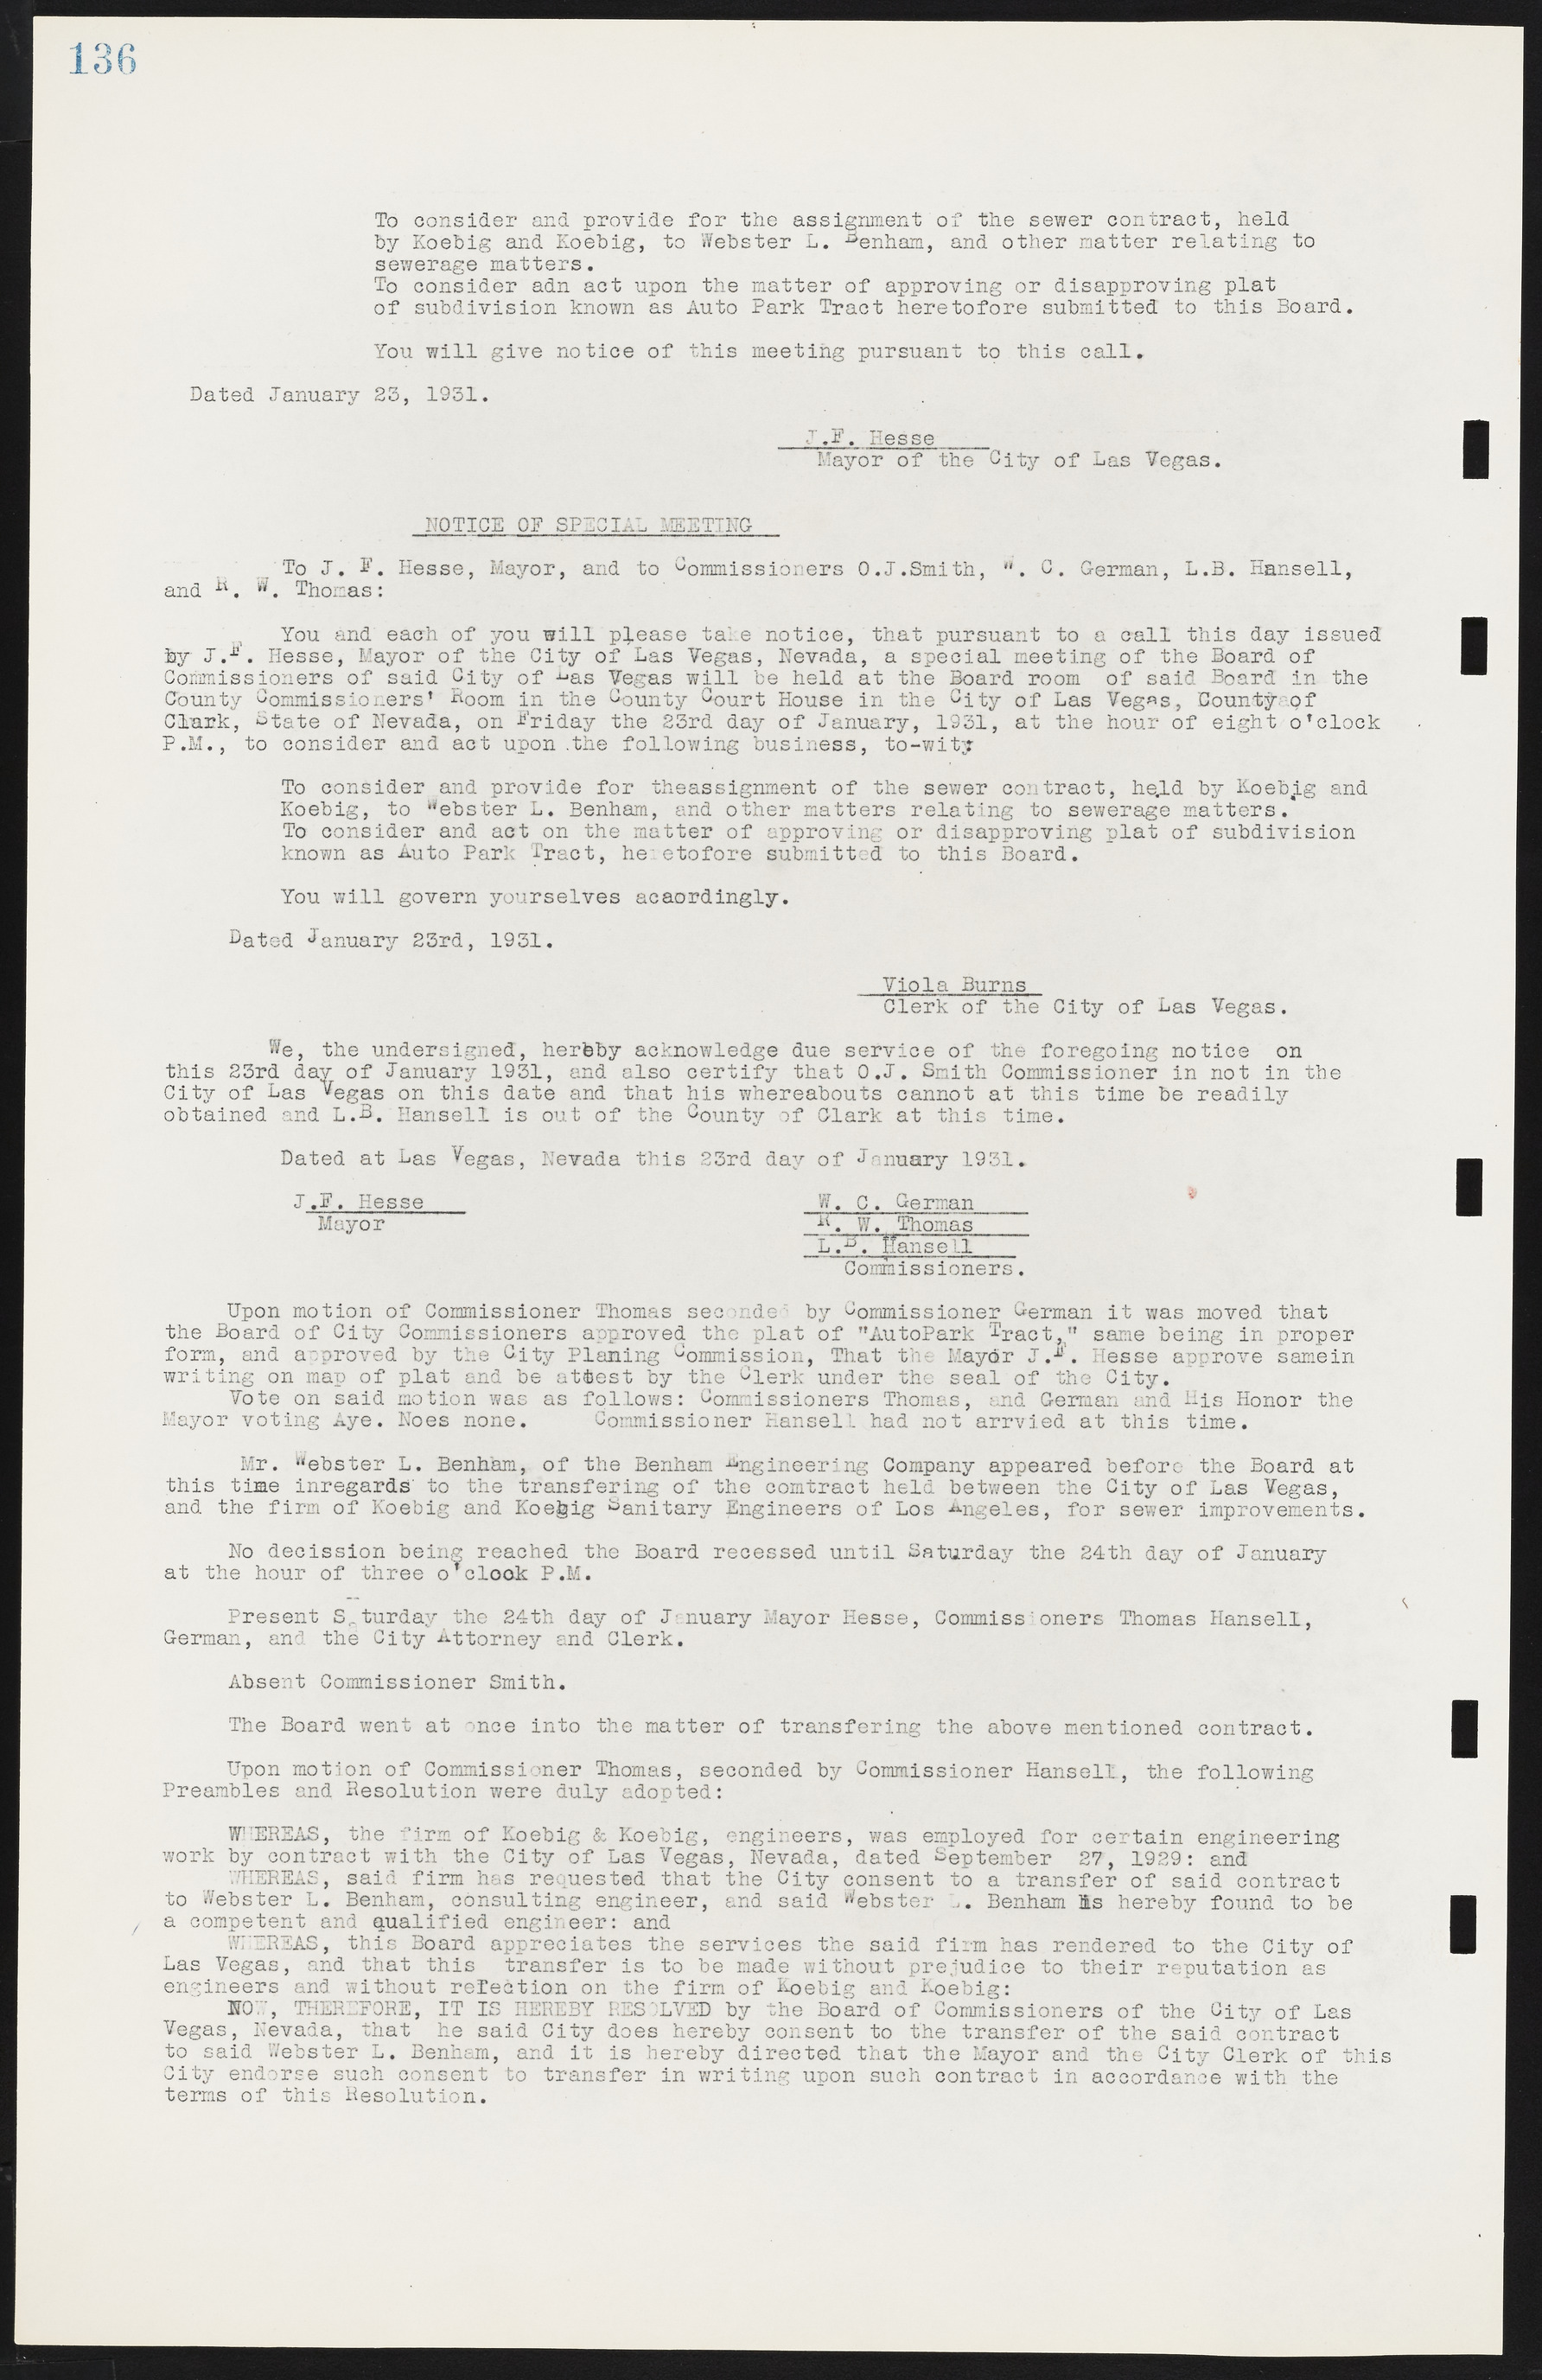 Las Vegas City Commission Minutes, May 14, 1929 to February 11, 1937, lvc000003-142